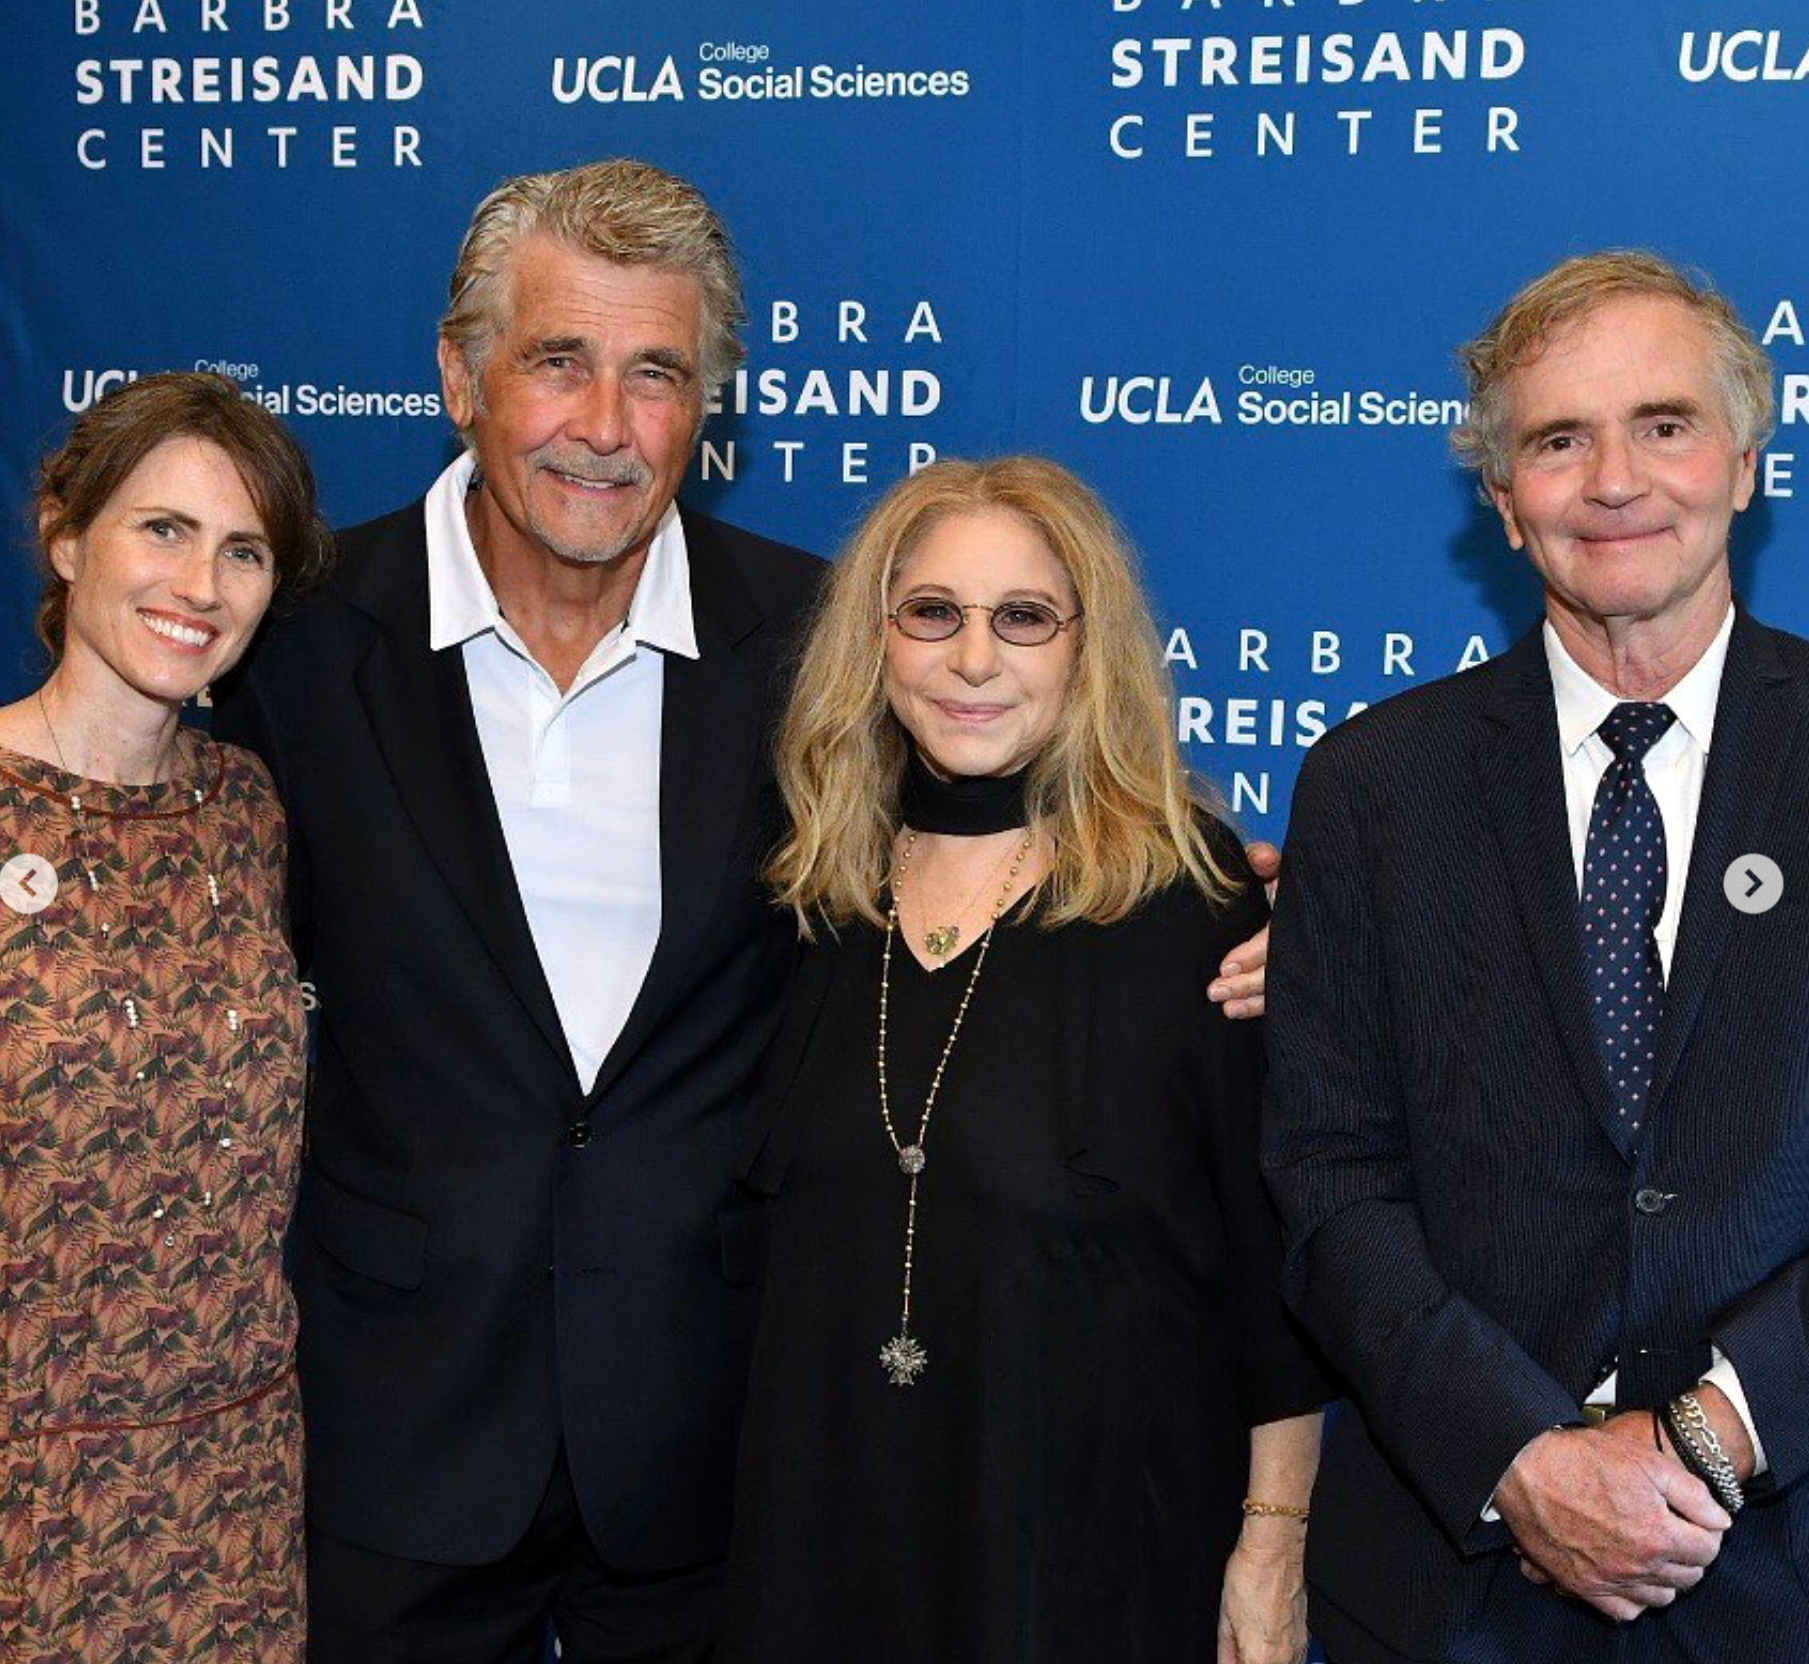 Streisand at UCLA 2023 with James Brolin